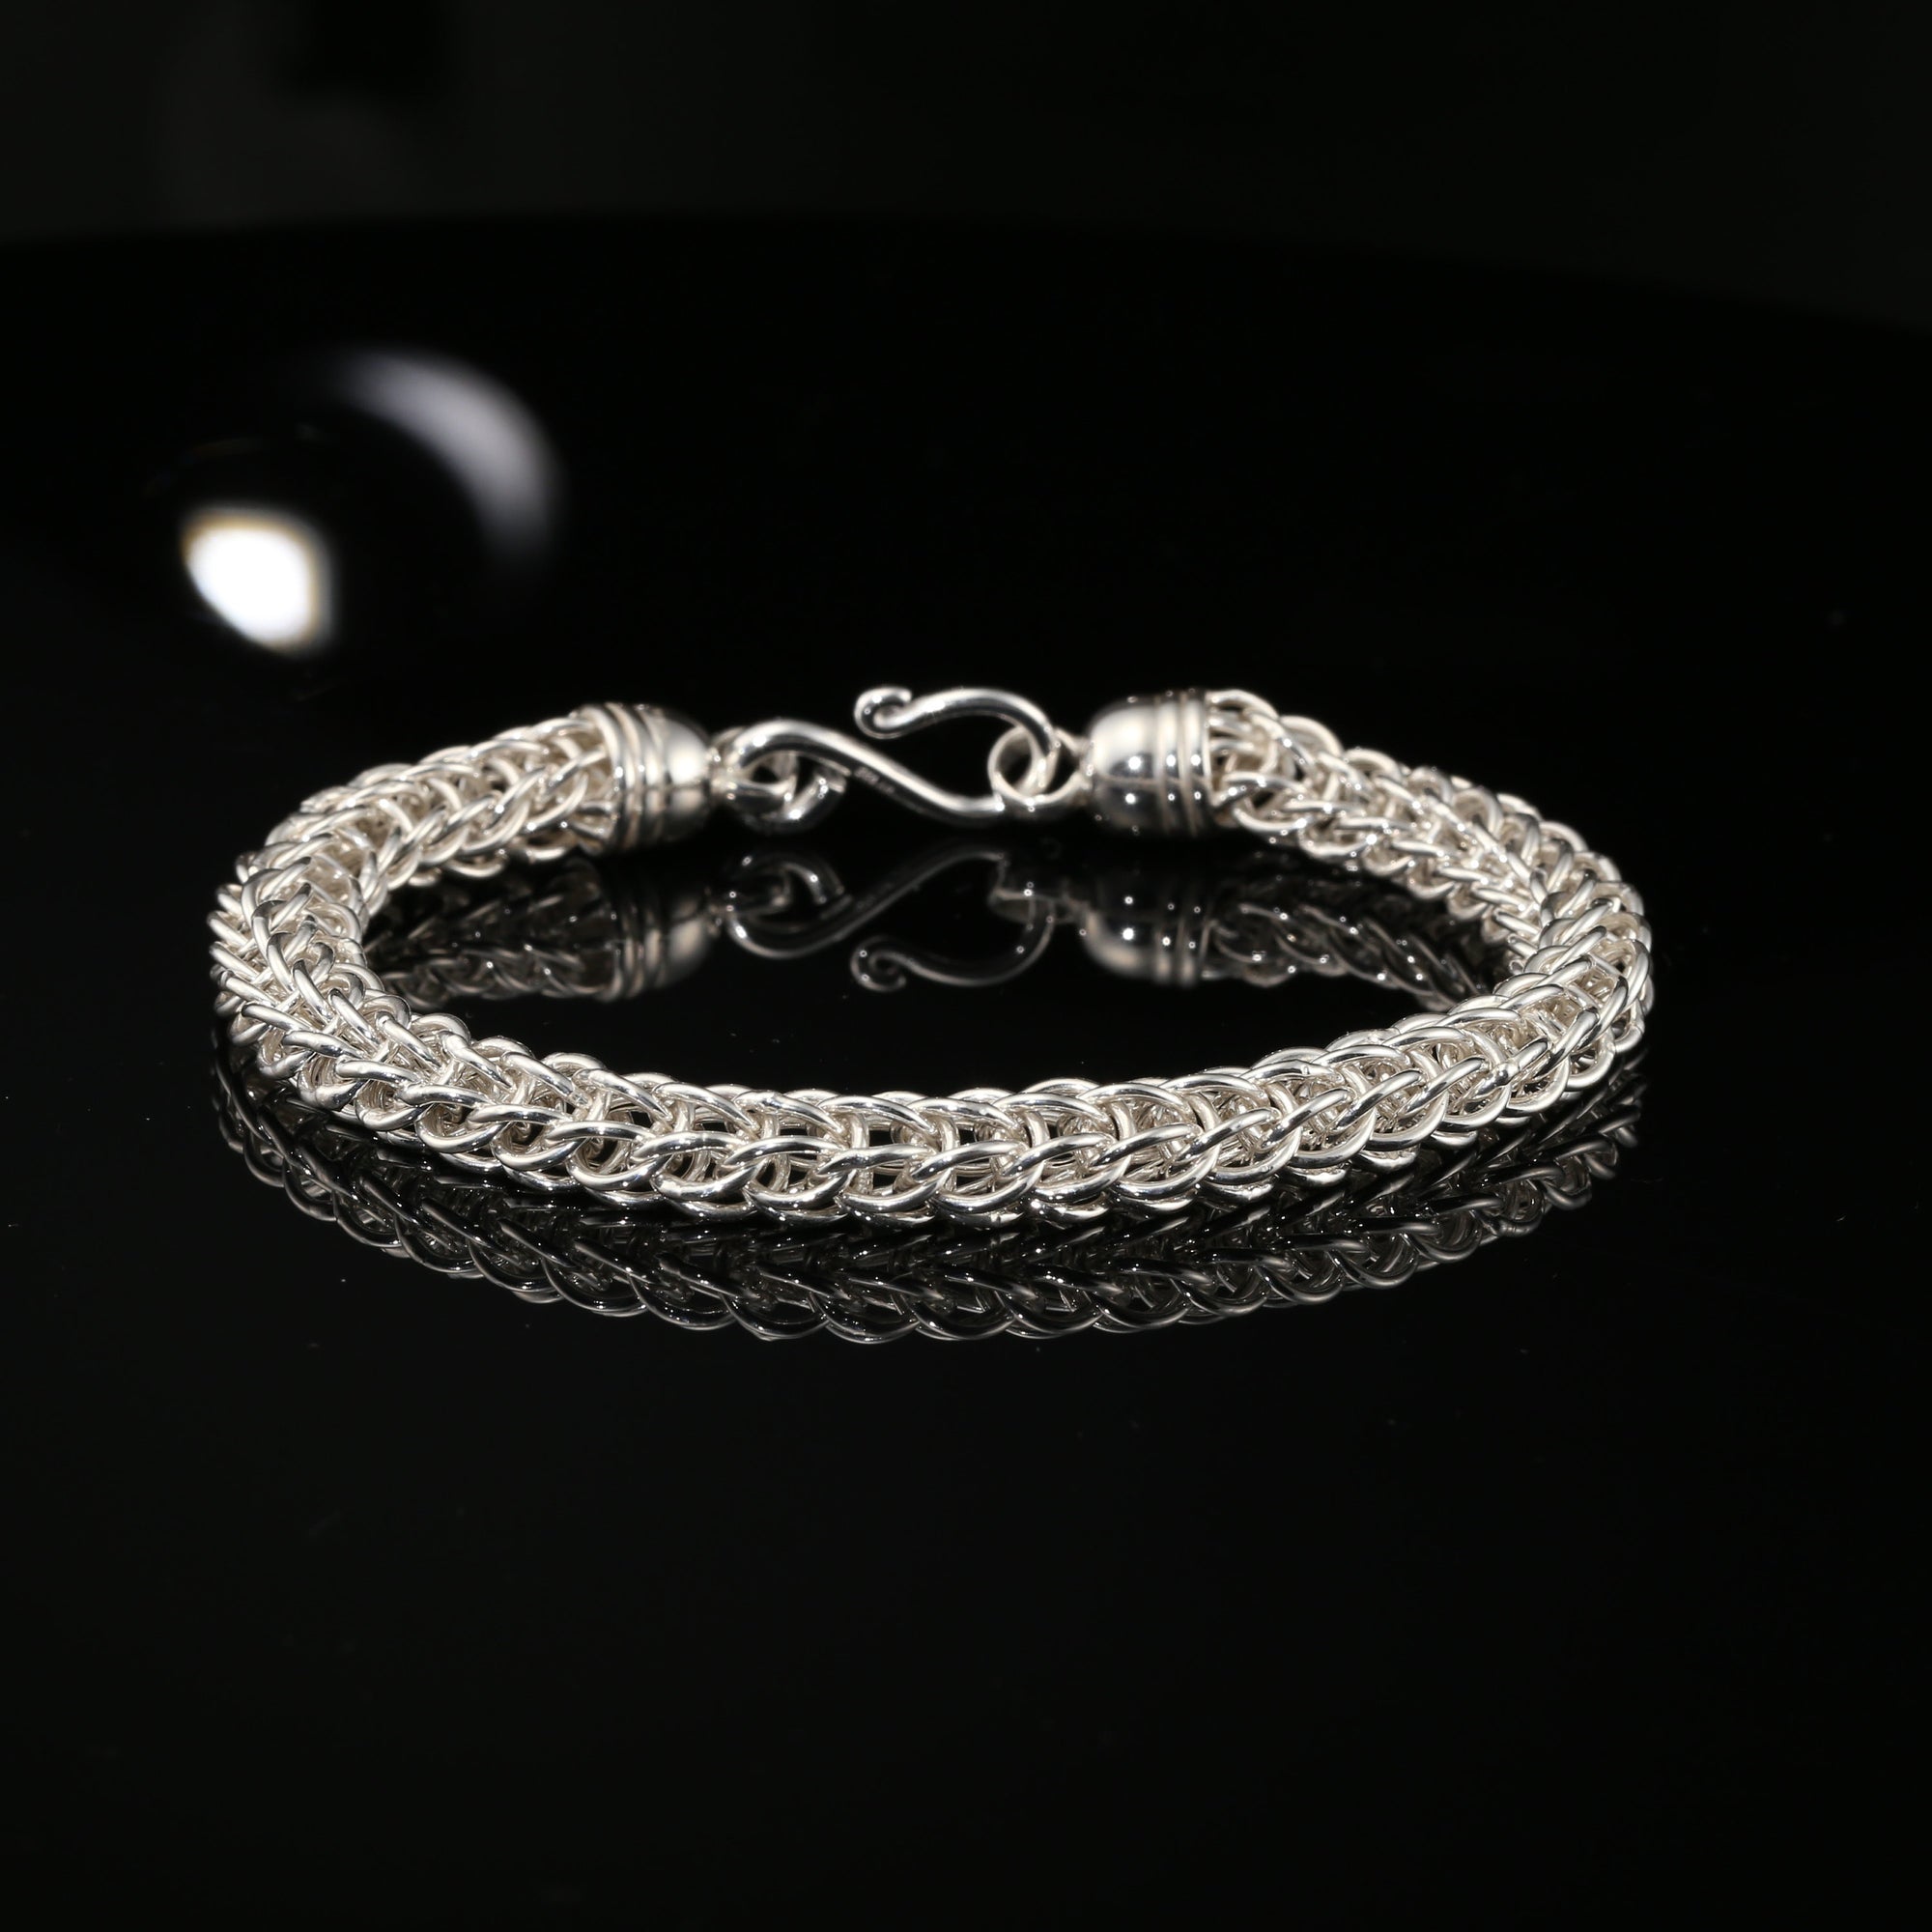 Handmade Byzantine Chain Bracelet with S-Hook Clasp, 8.75&quot;, Unisex in Sterling Silver